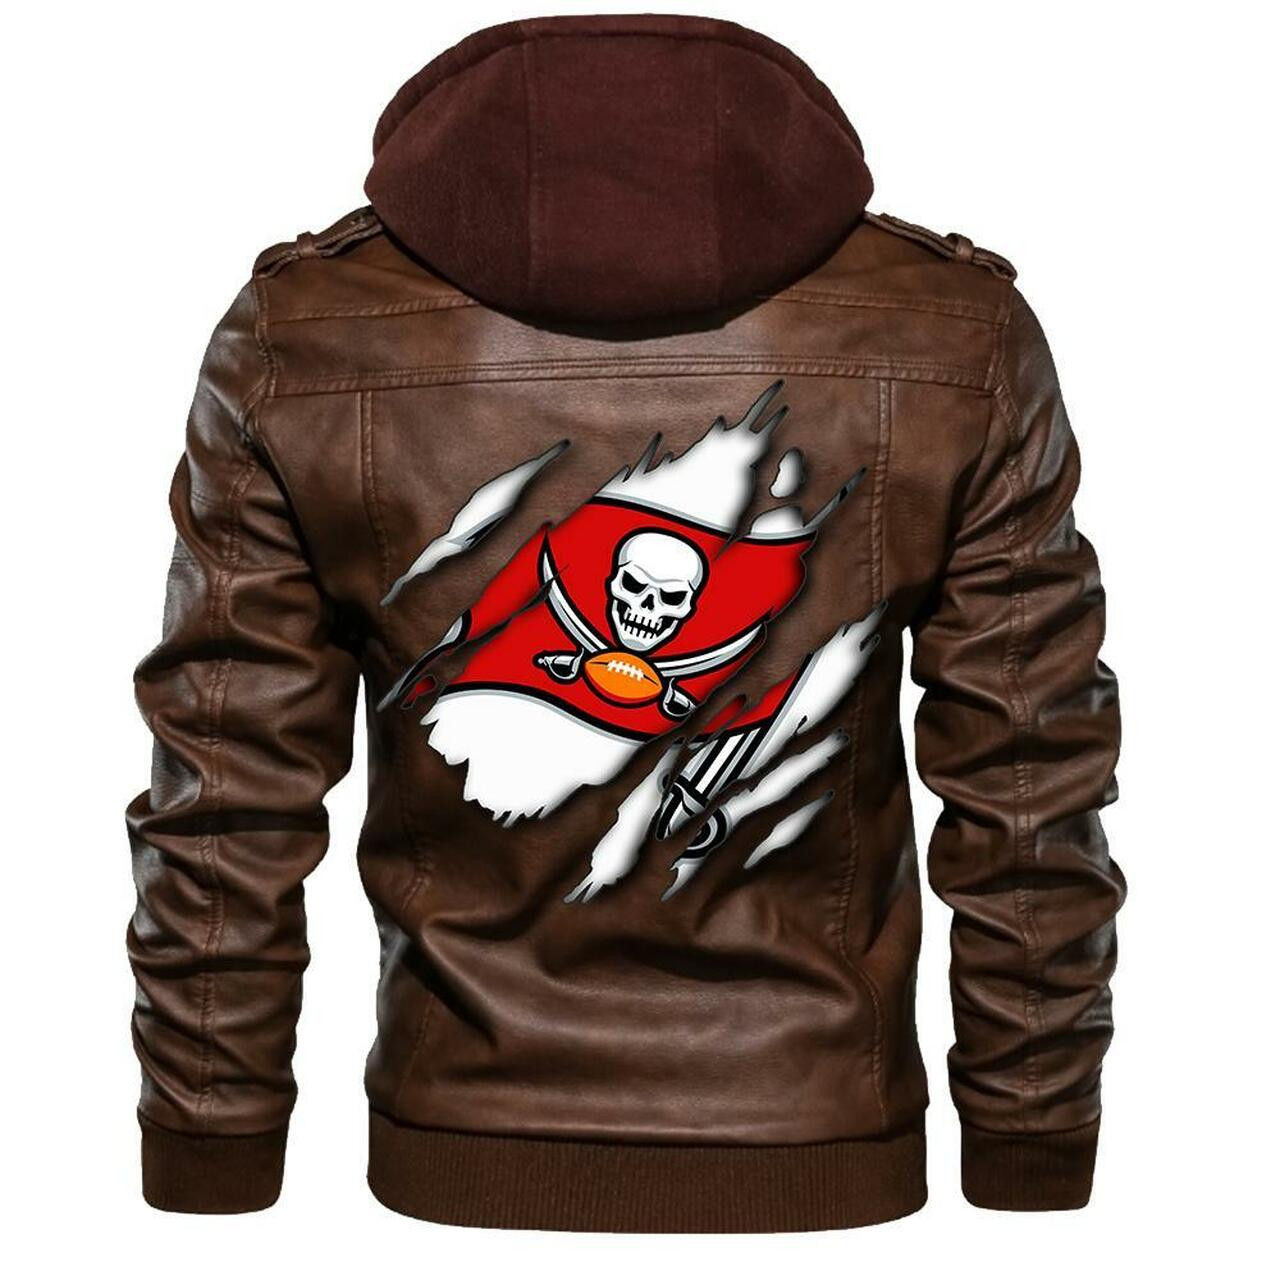 Don't wait another minute, Get Hot Leather Jacket today 169